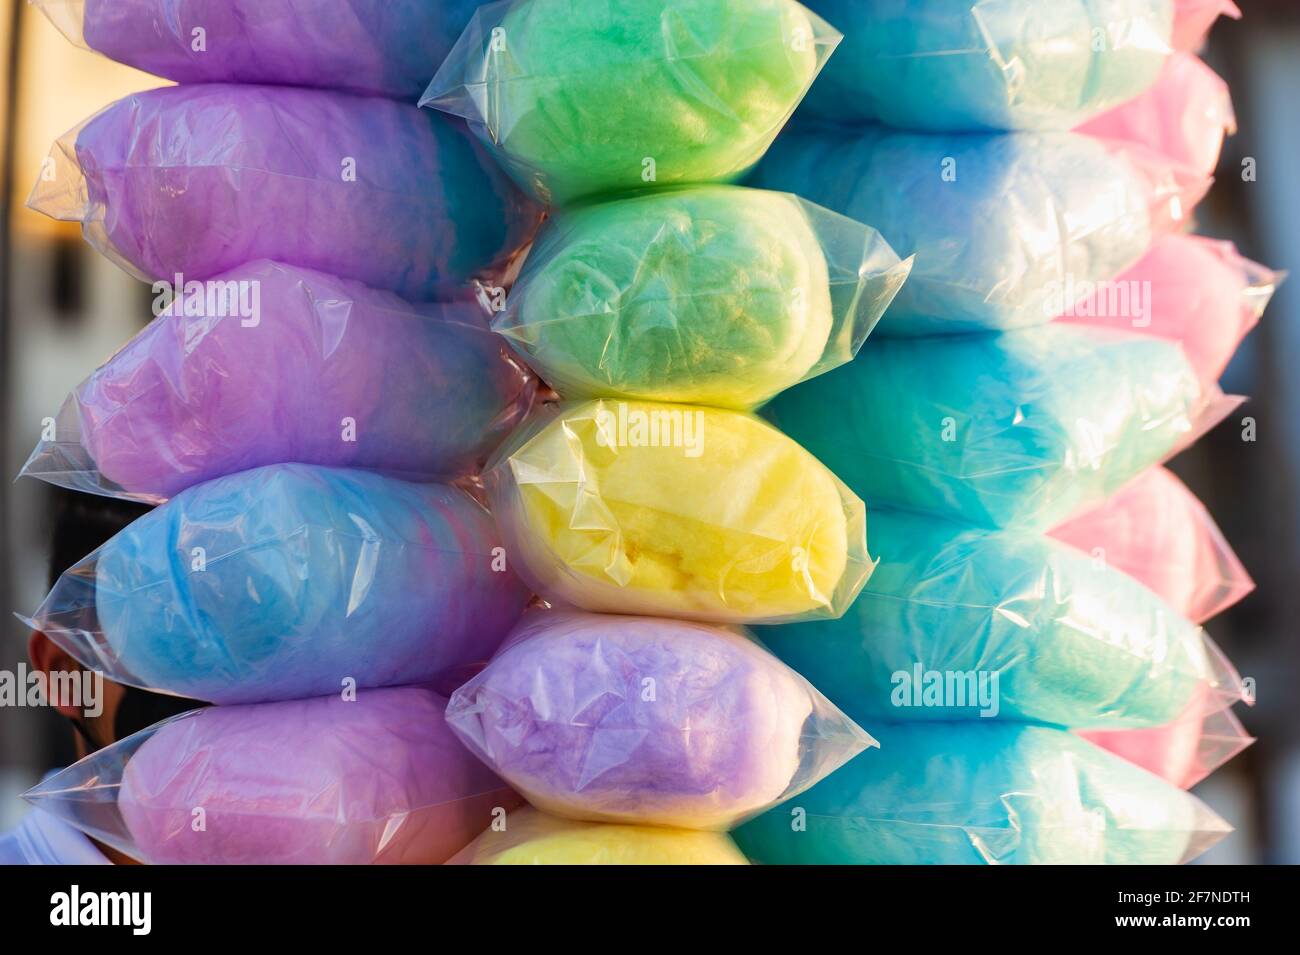 An Assortment of Cotton Candy Colors In Separate Bags Stock Photo